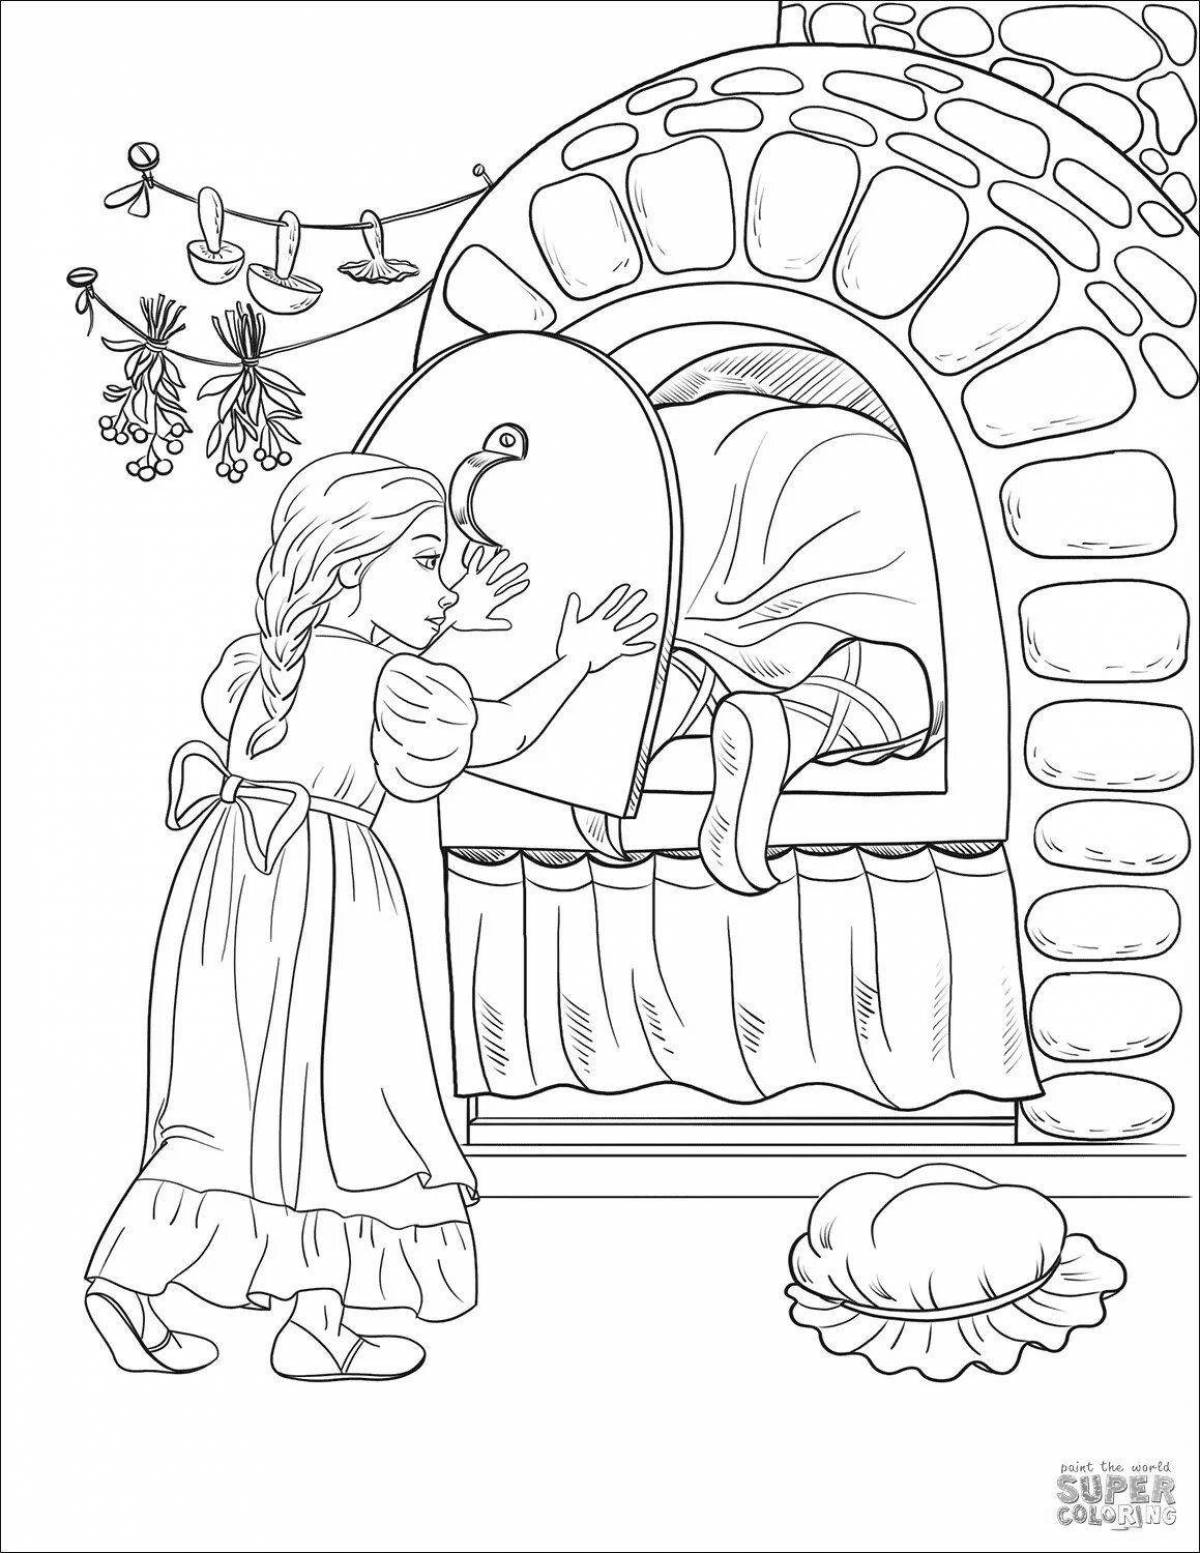 Hansel and Gretel coloring page